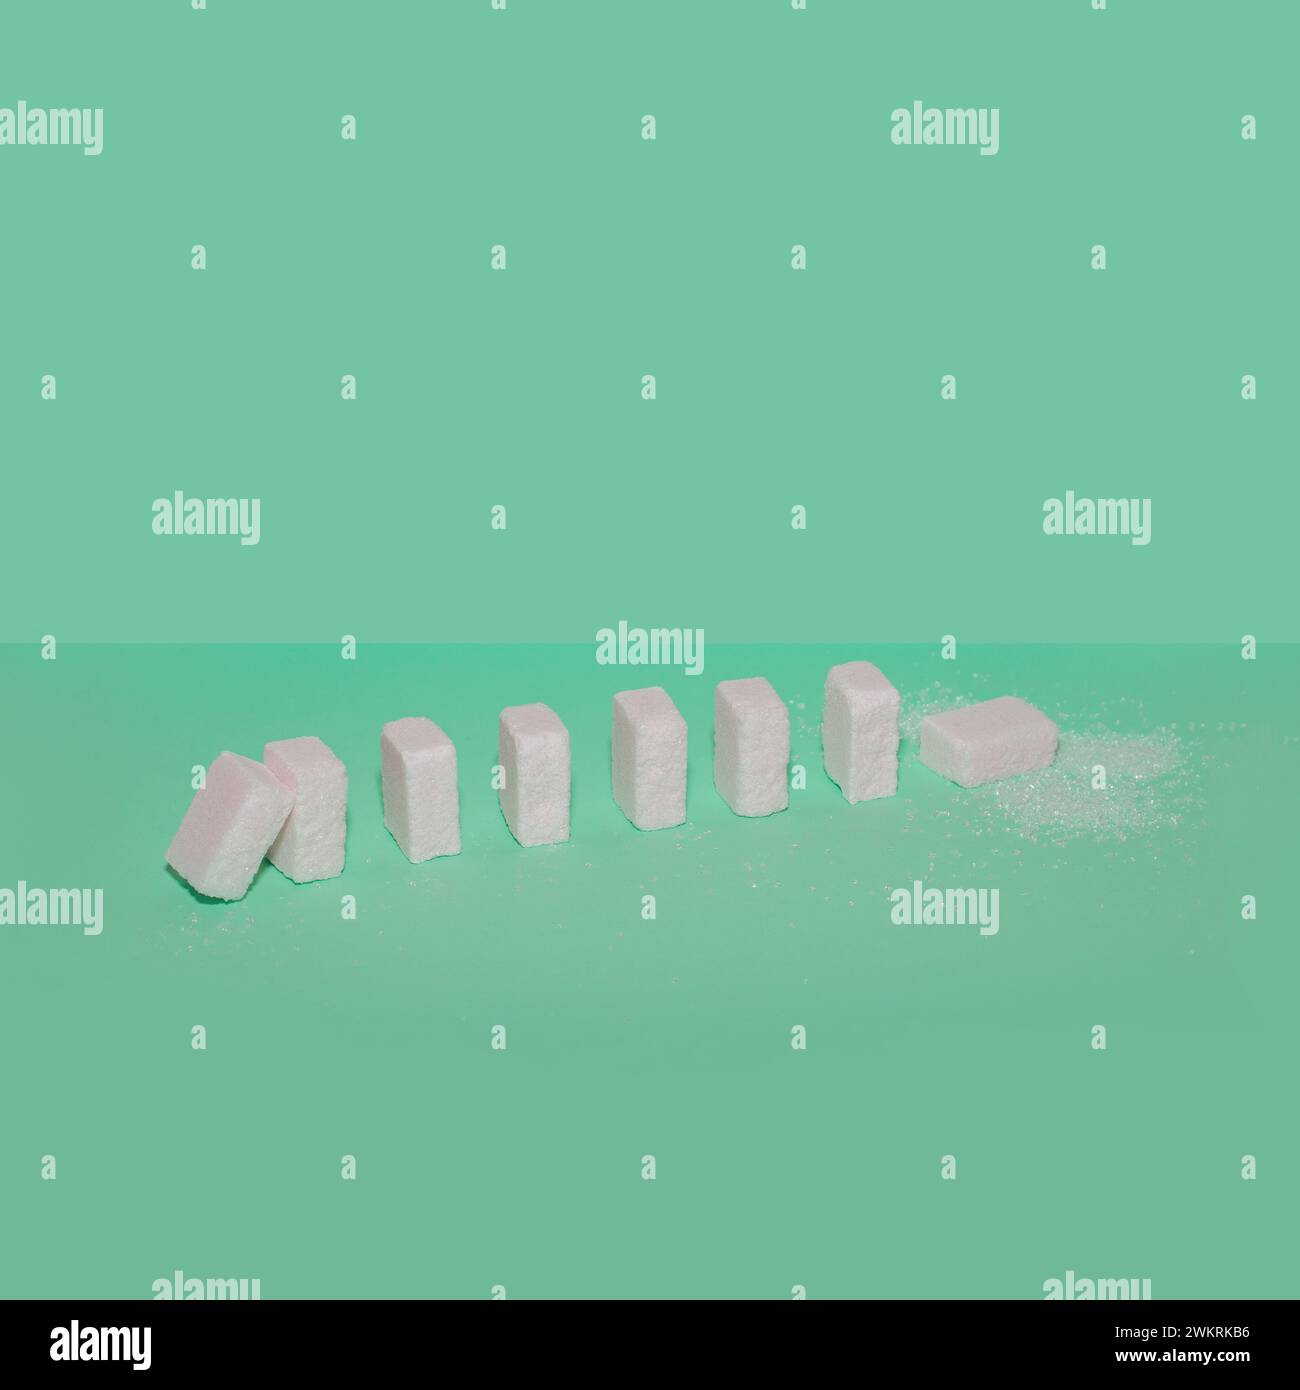 Sugar cubes as domino effect on a green background. Creative food concept. Stock Photo